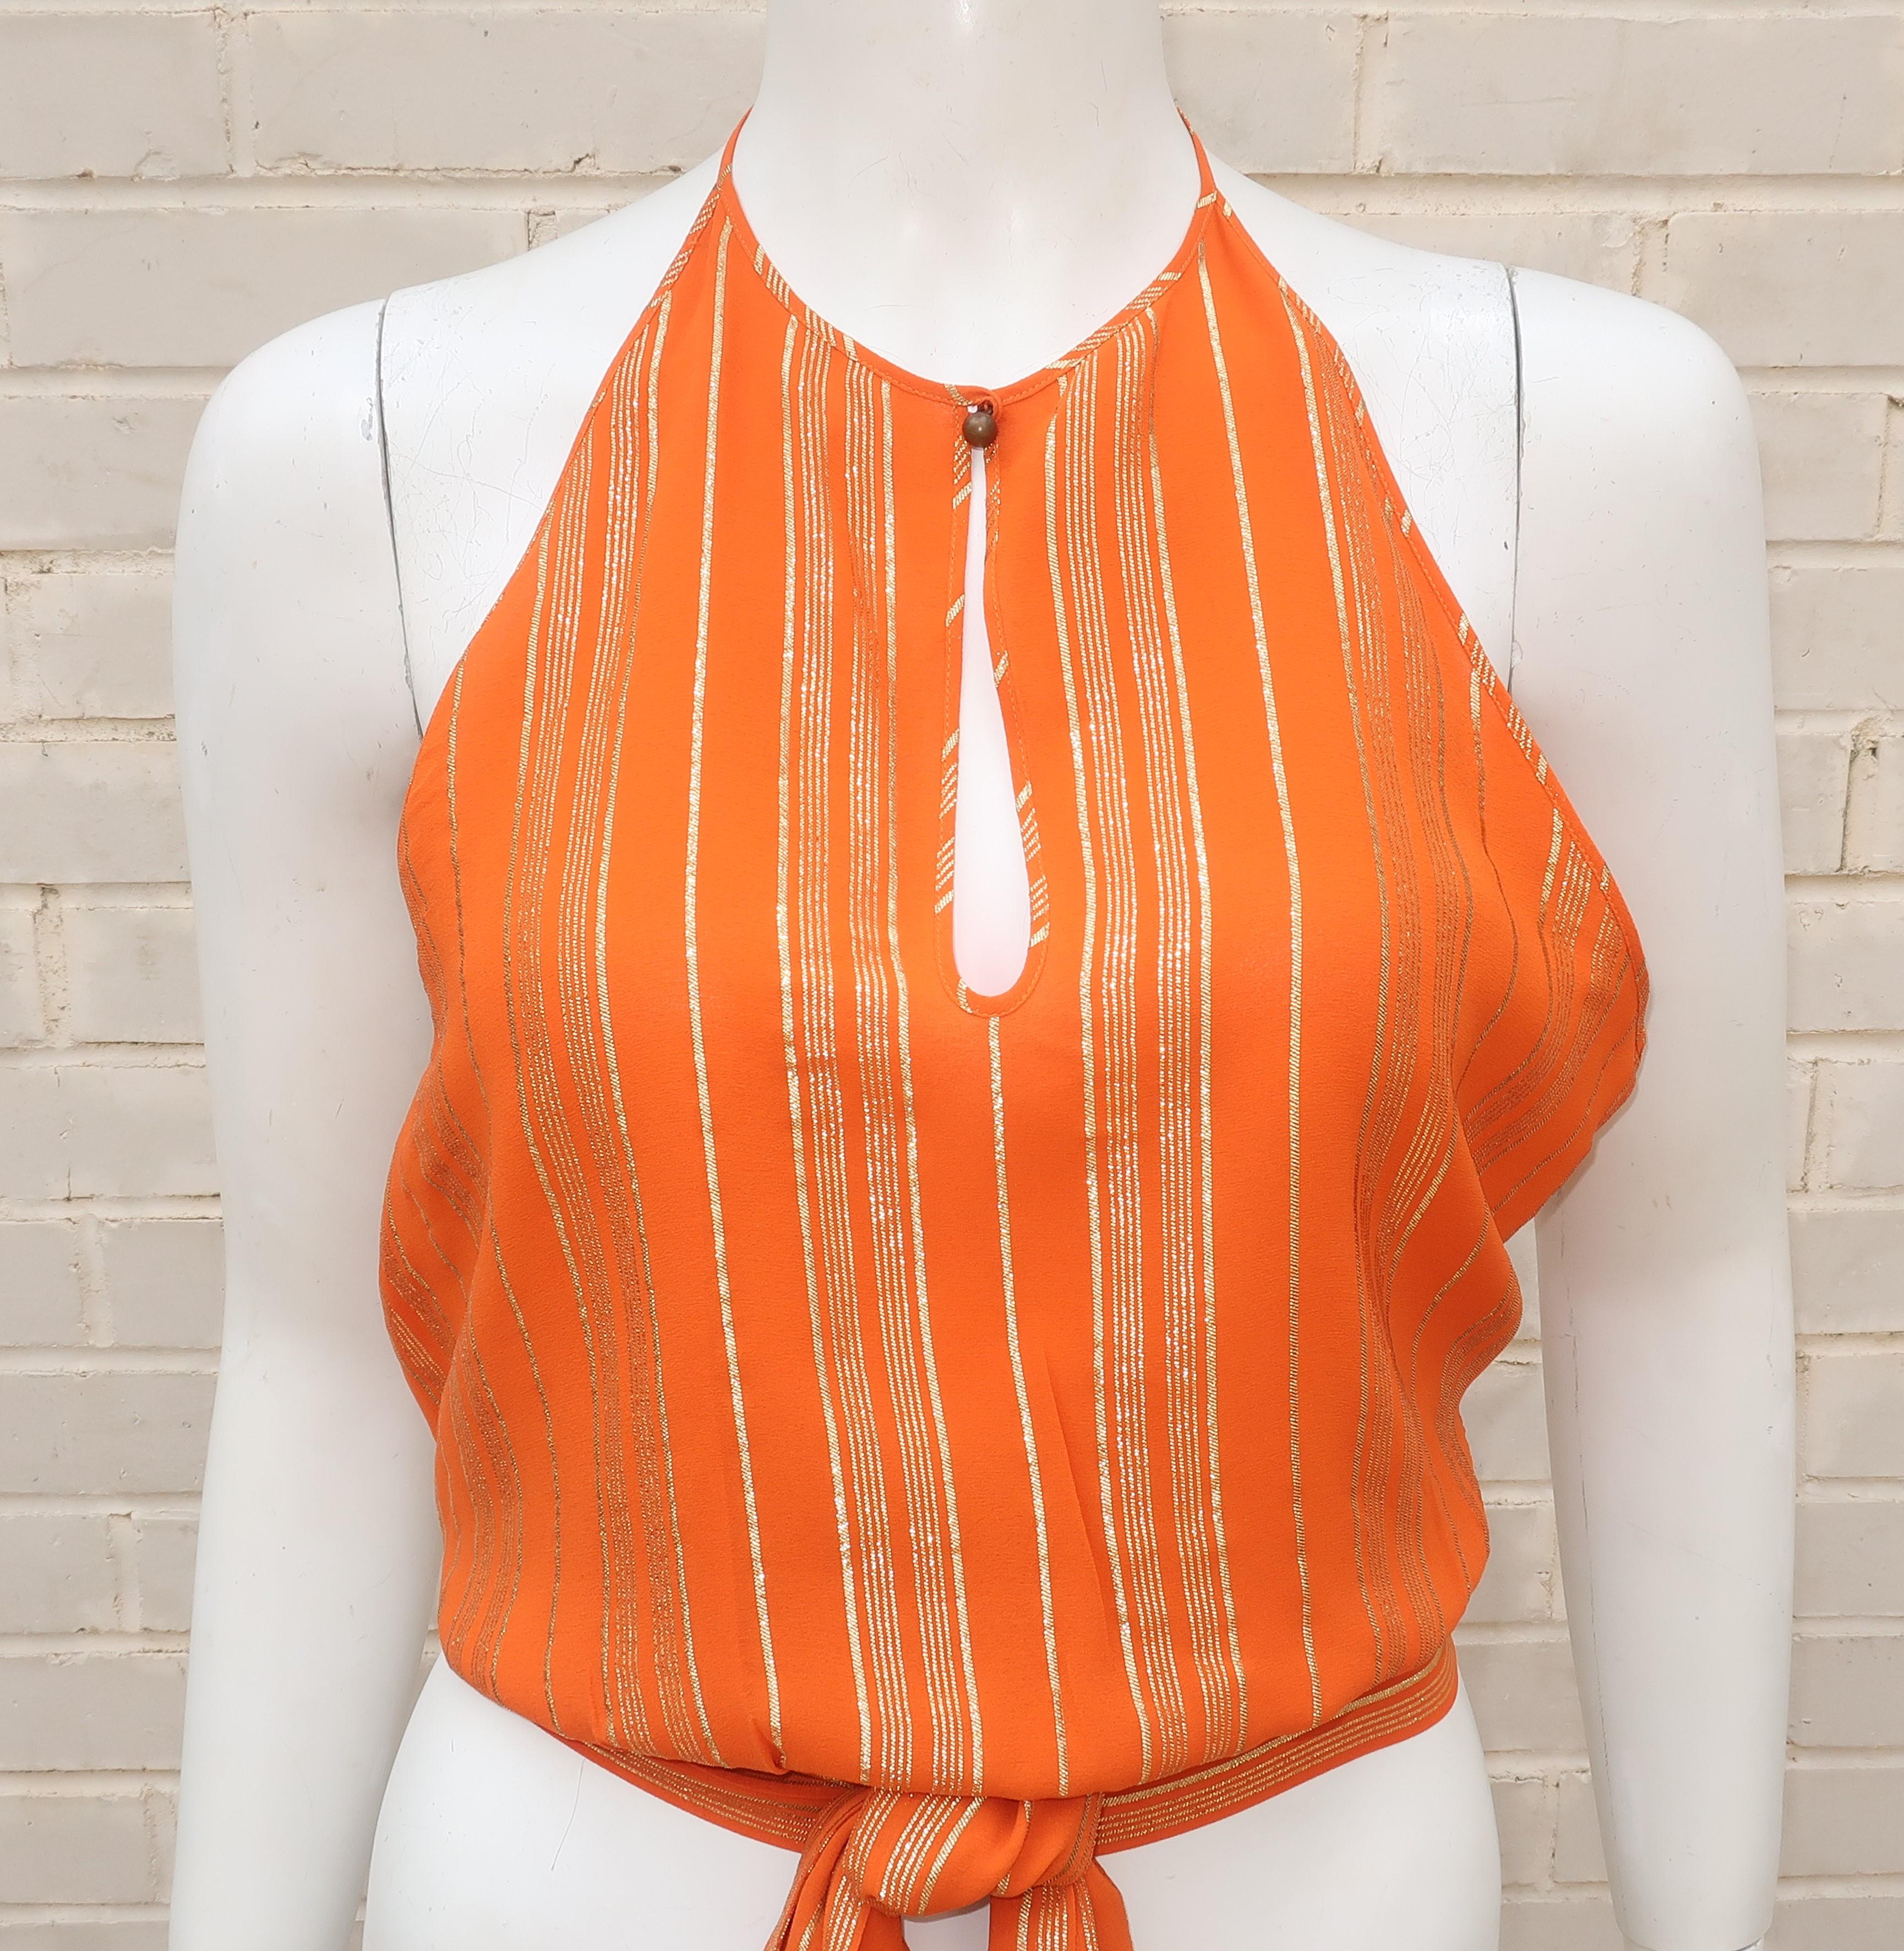 This Celine orange silk crepe top with a gold lamé stripe pattern is part tank and part halter.  It features a keyhole button neckline with spaghetti straps offering an open back for a stylish combination of casual and chic.  The cummerbund style